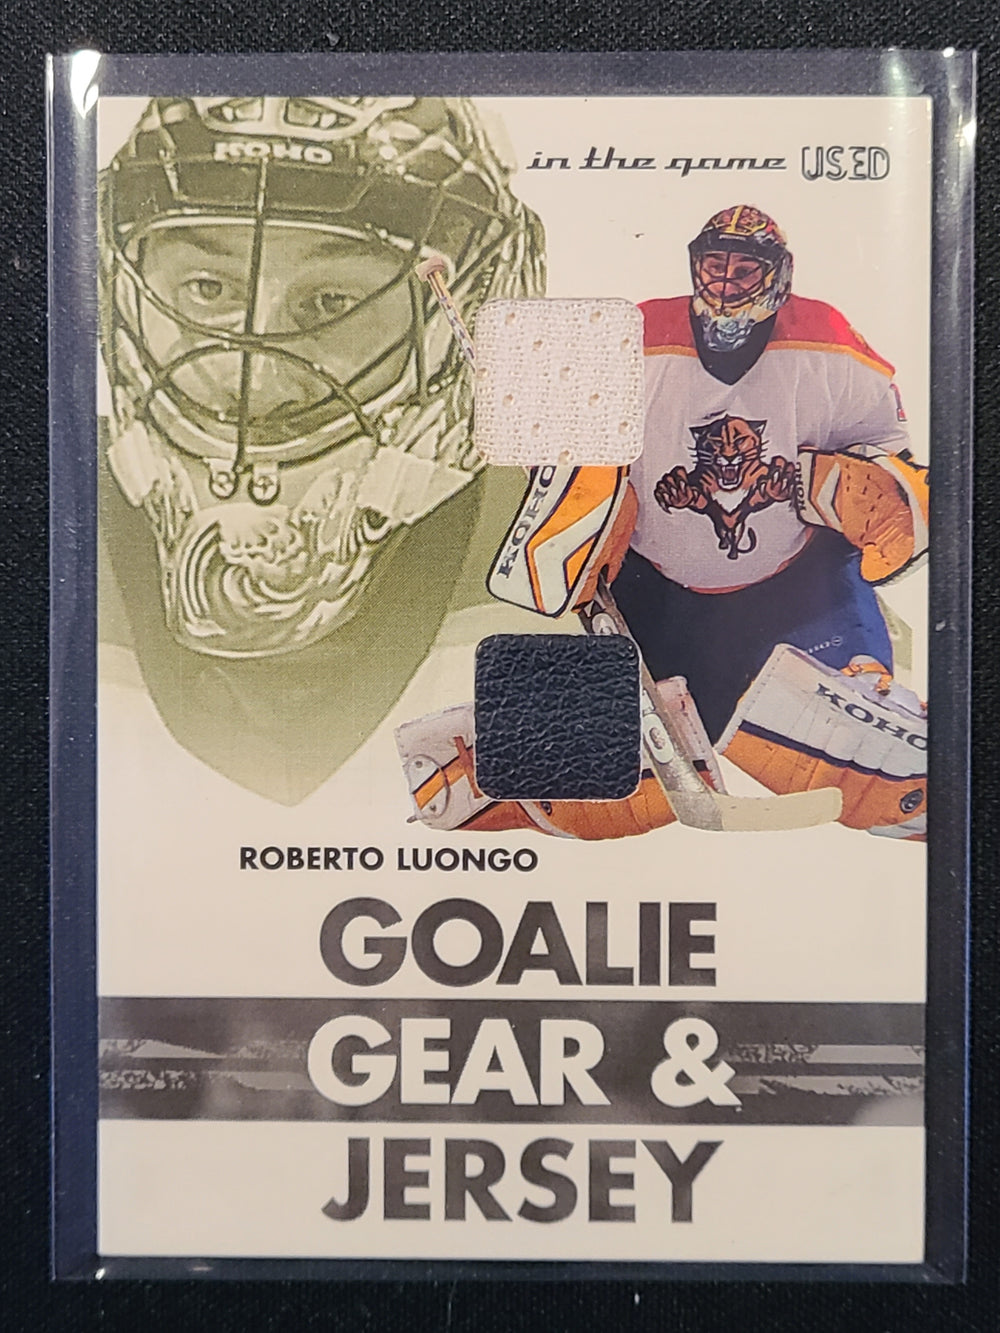 2003-04 ITG Used Goalie Gear & Jersey #GG-2 Roberto Luongo Florida Panthers (Glove)